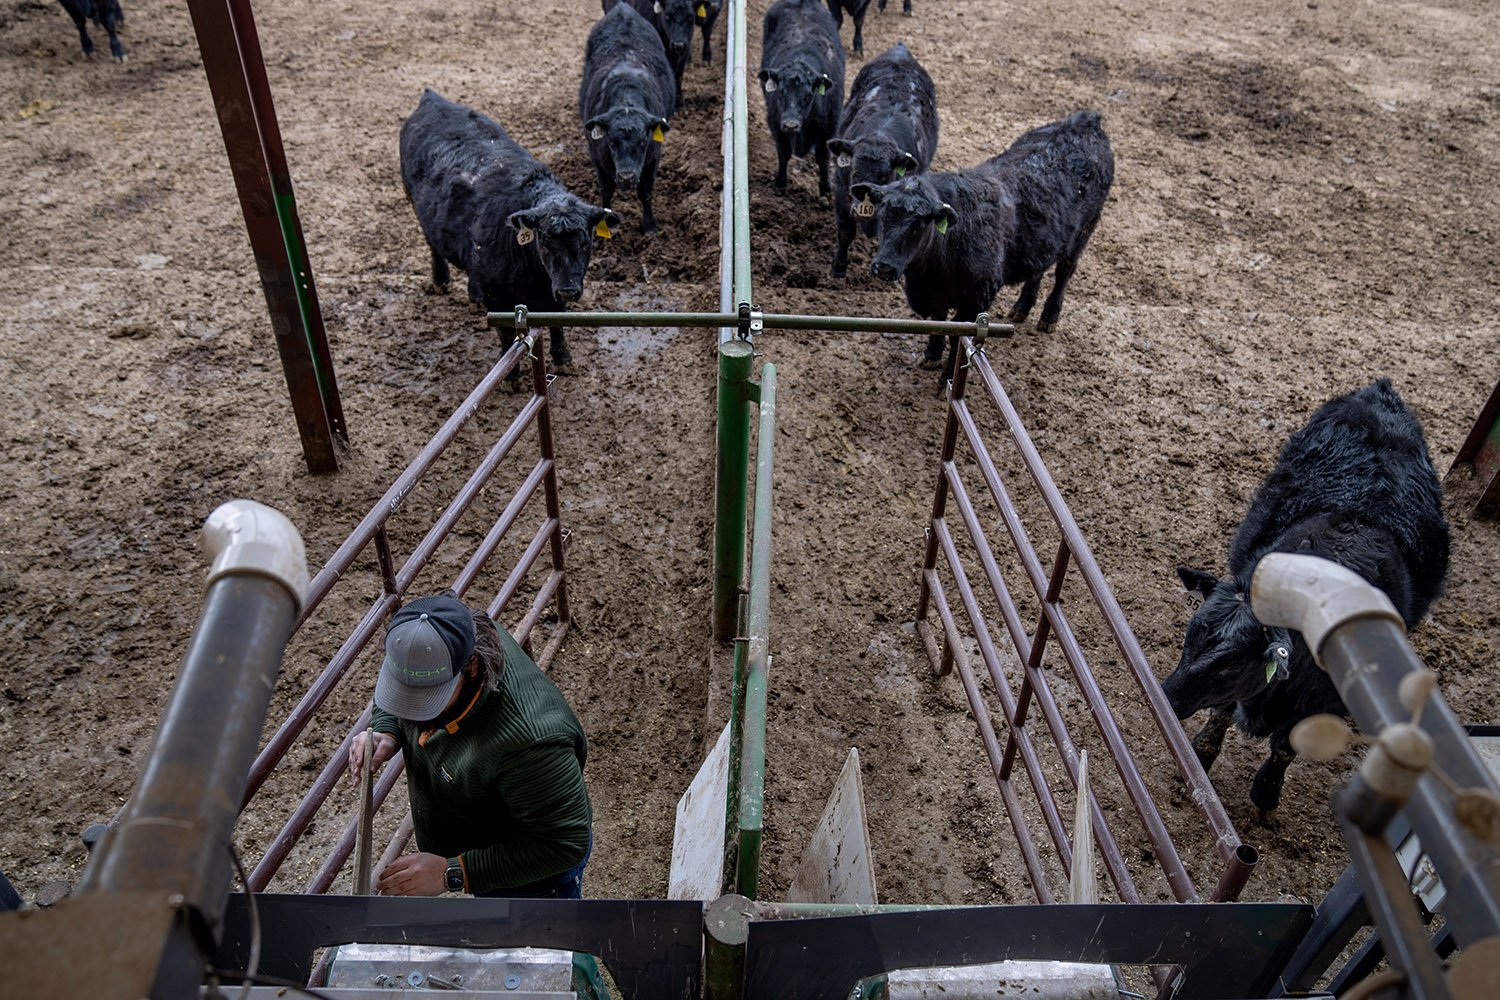  Cattle wait for Conner Cox, infield service technician with C-Lock, to finish servicing a GreedFeed machine so they can enter to receive treats of alfalfa pellets at Colorado State University’s research pens in Fort Collins, Colo., Wednesday, March 